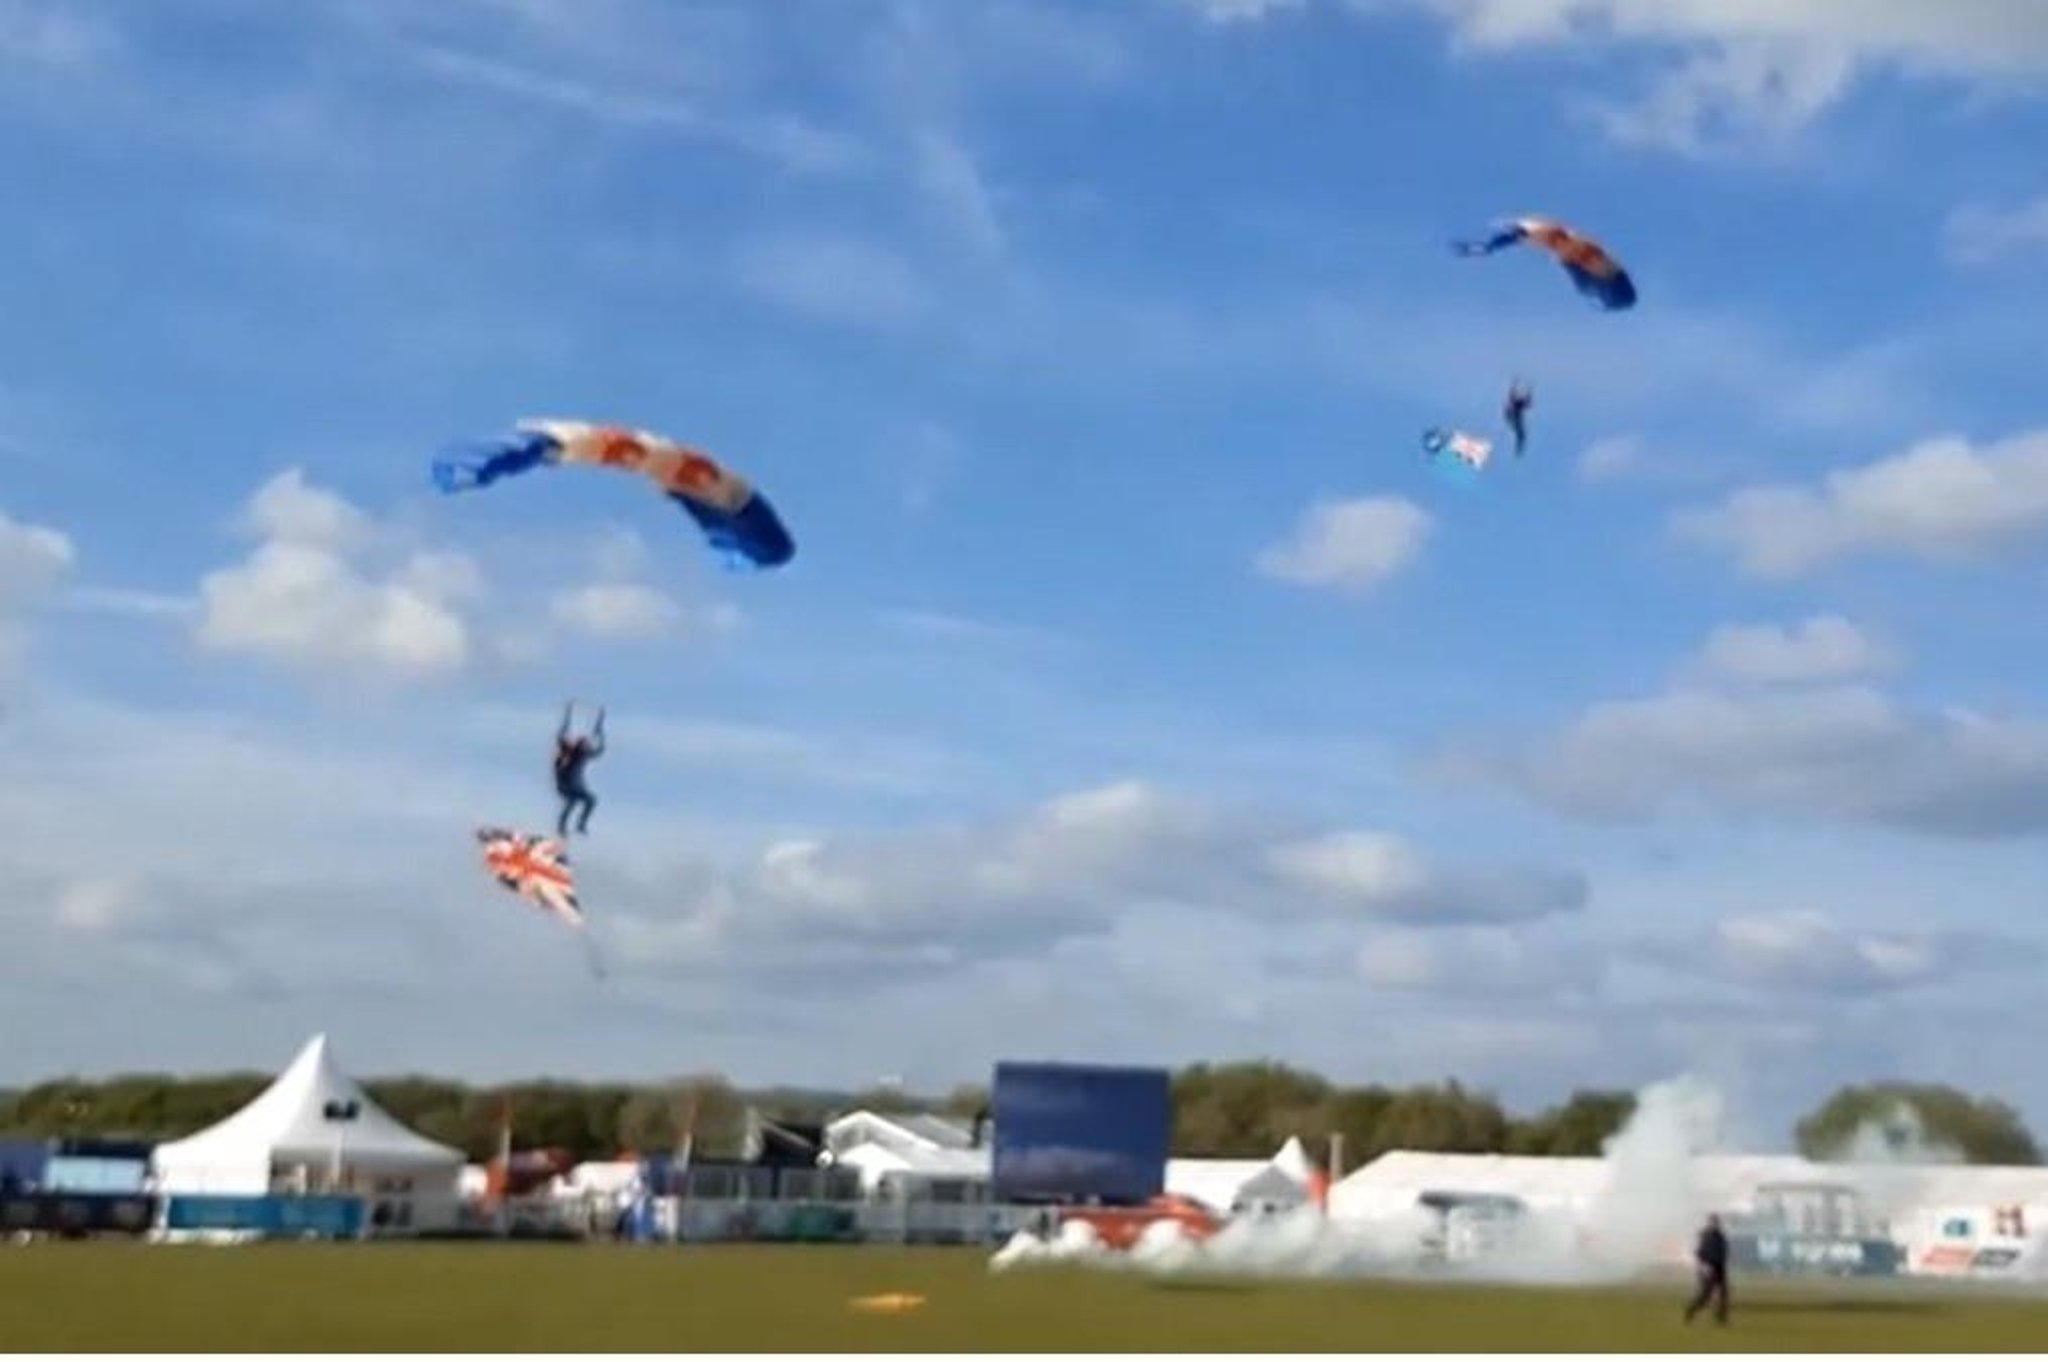 Video: Watch the dramatic full 5-minute RAF parachute drop over Balmoral Show